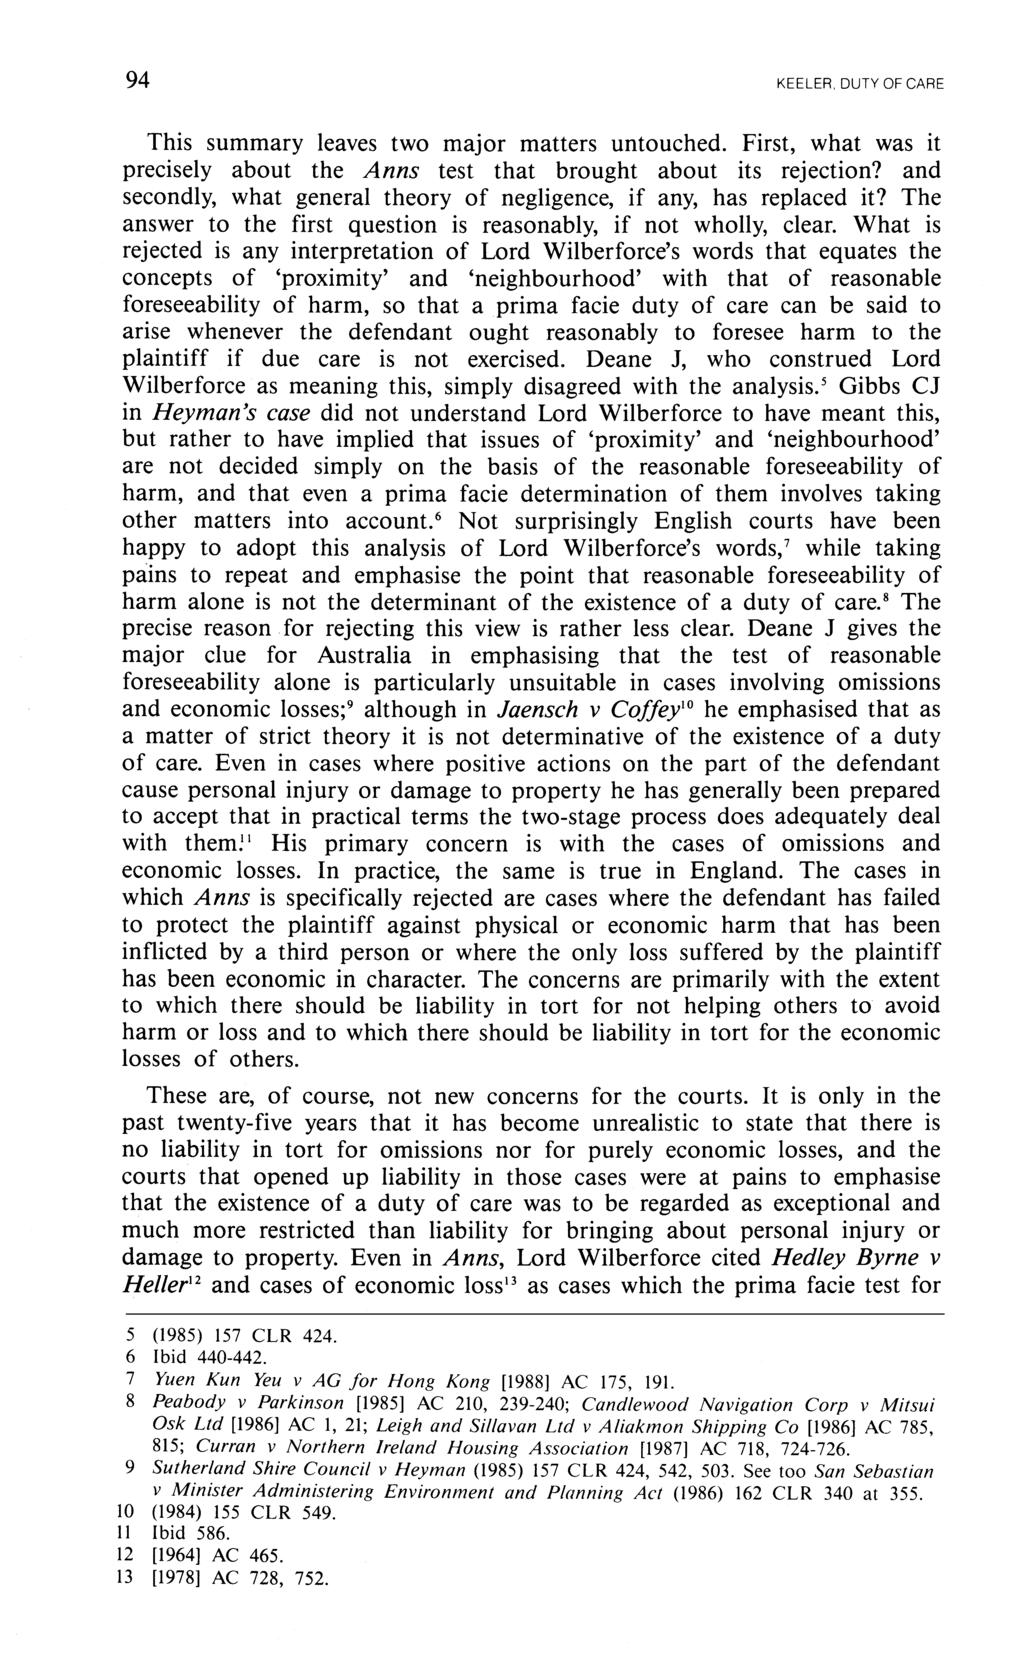 94 KEELER, DUTY OF CARE This summary leaves two major matters untouched. First, what was it precisely about the Anns test that brought about its rejection?